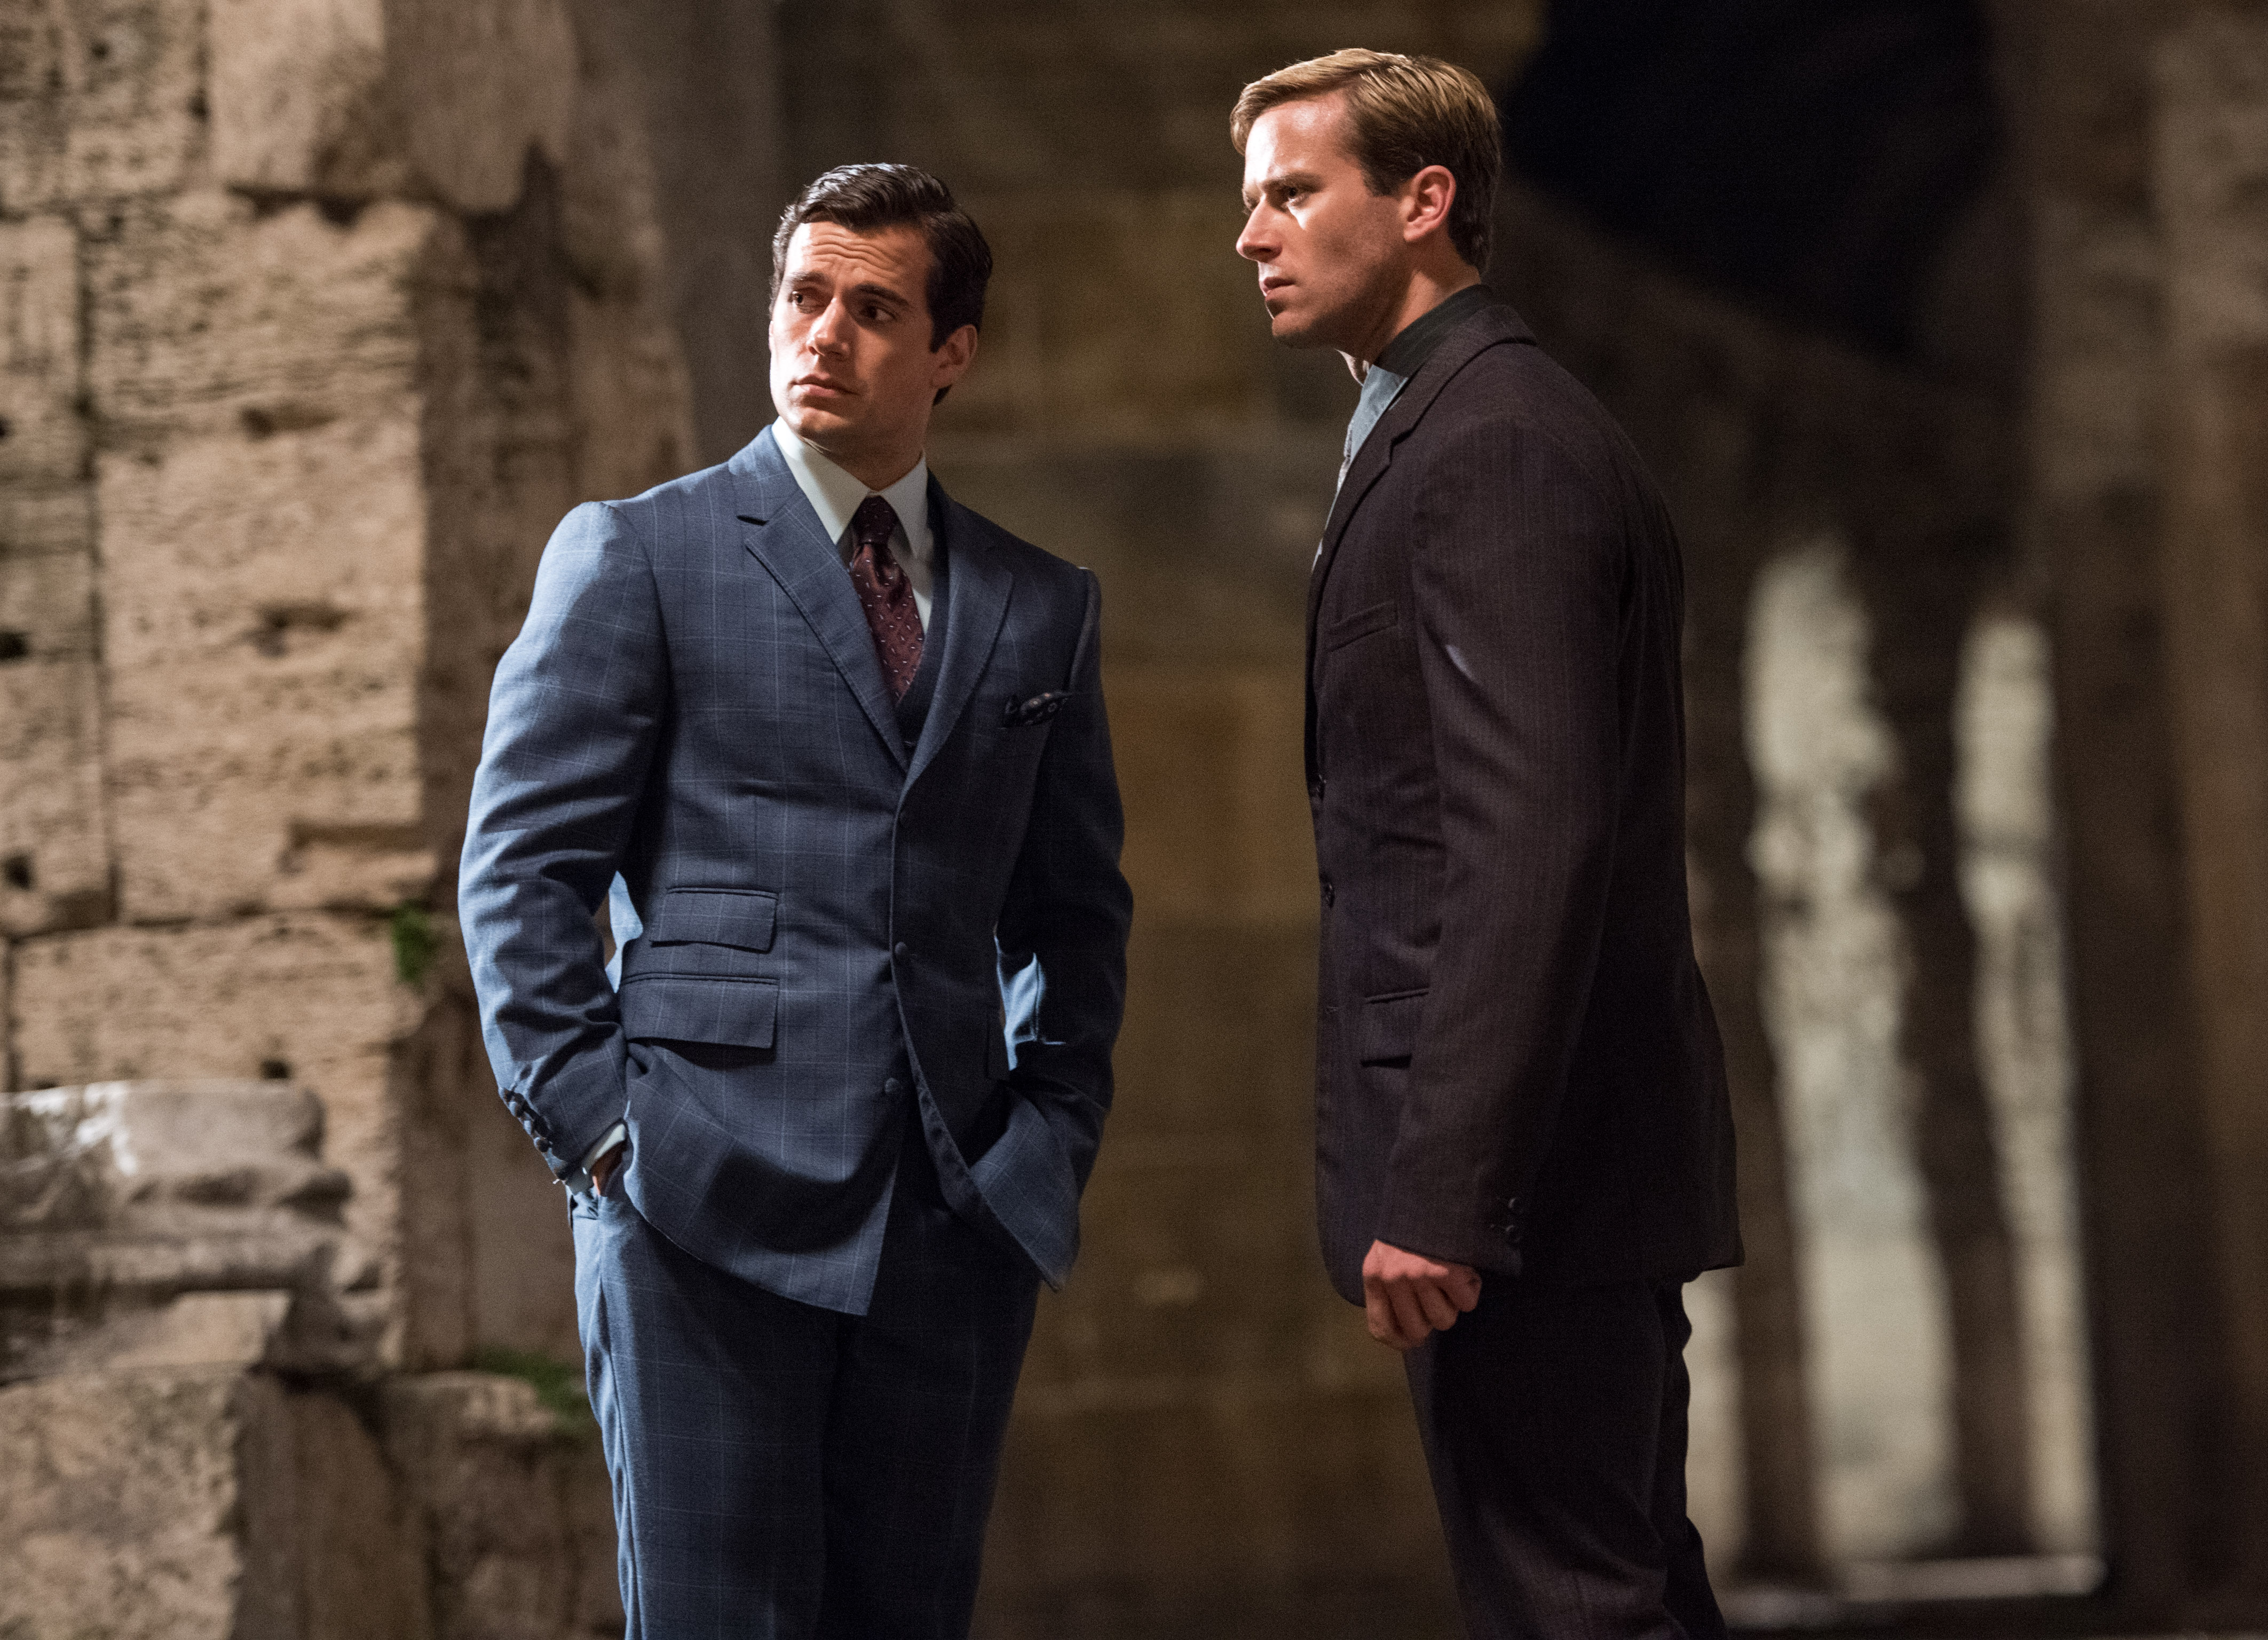 Movie The Man from U.N.C.L.E. HD Wallpaper | Background Image